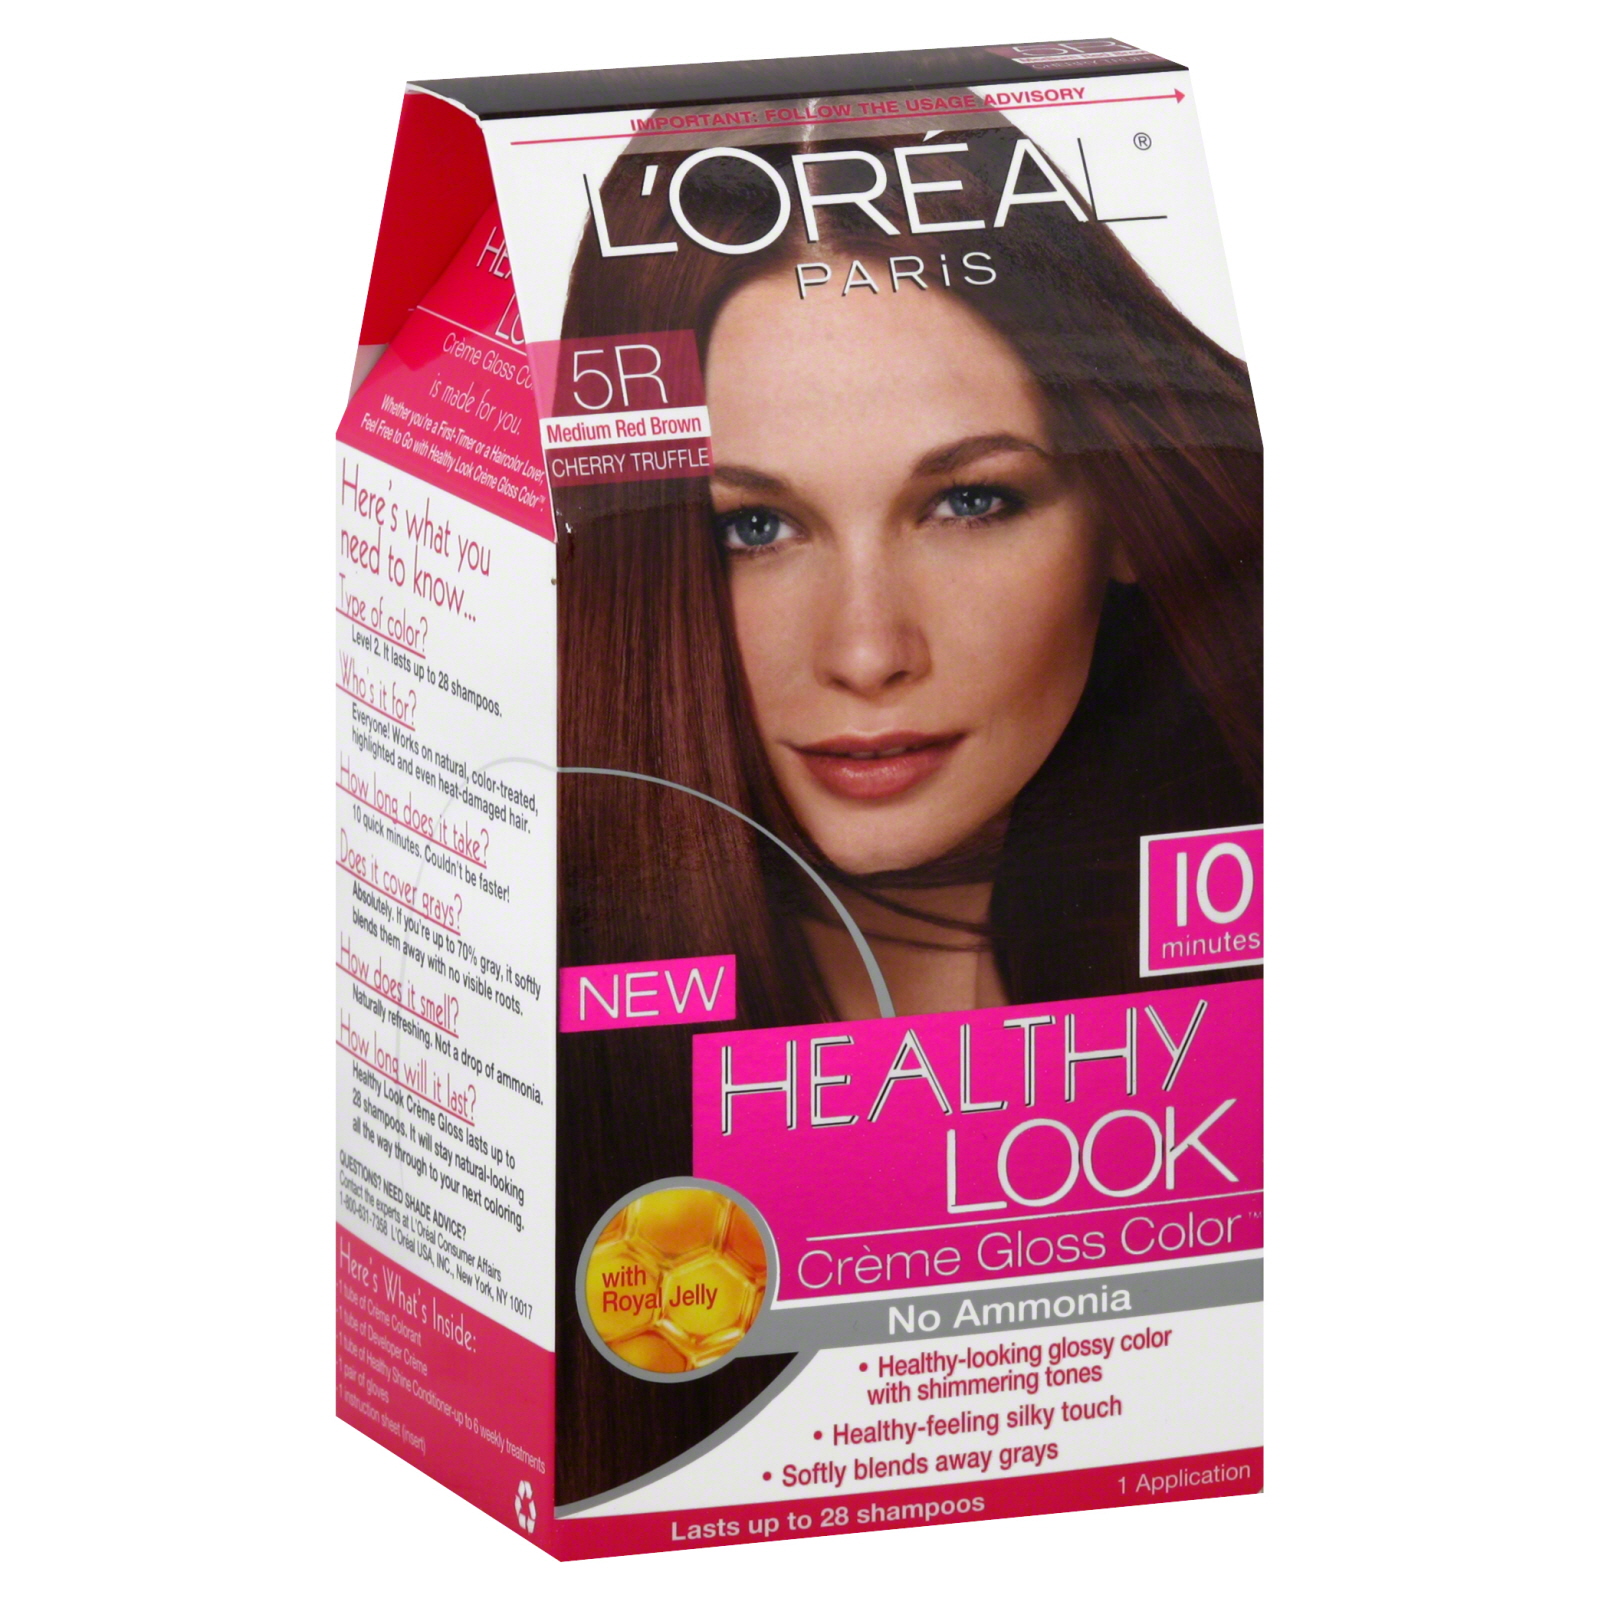 L'Oreal Healthy Look Hair Dye, Creme Gloss Color, Medium Red Brown 5R, 1 application